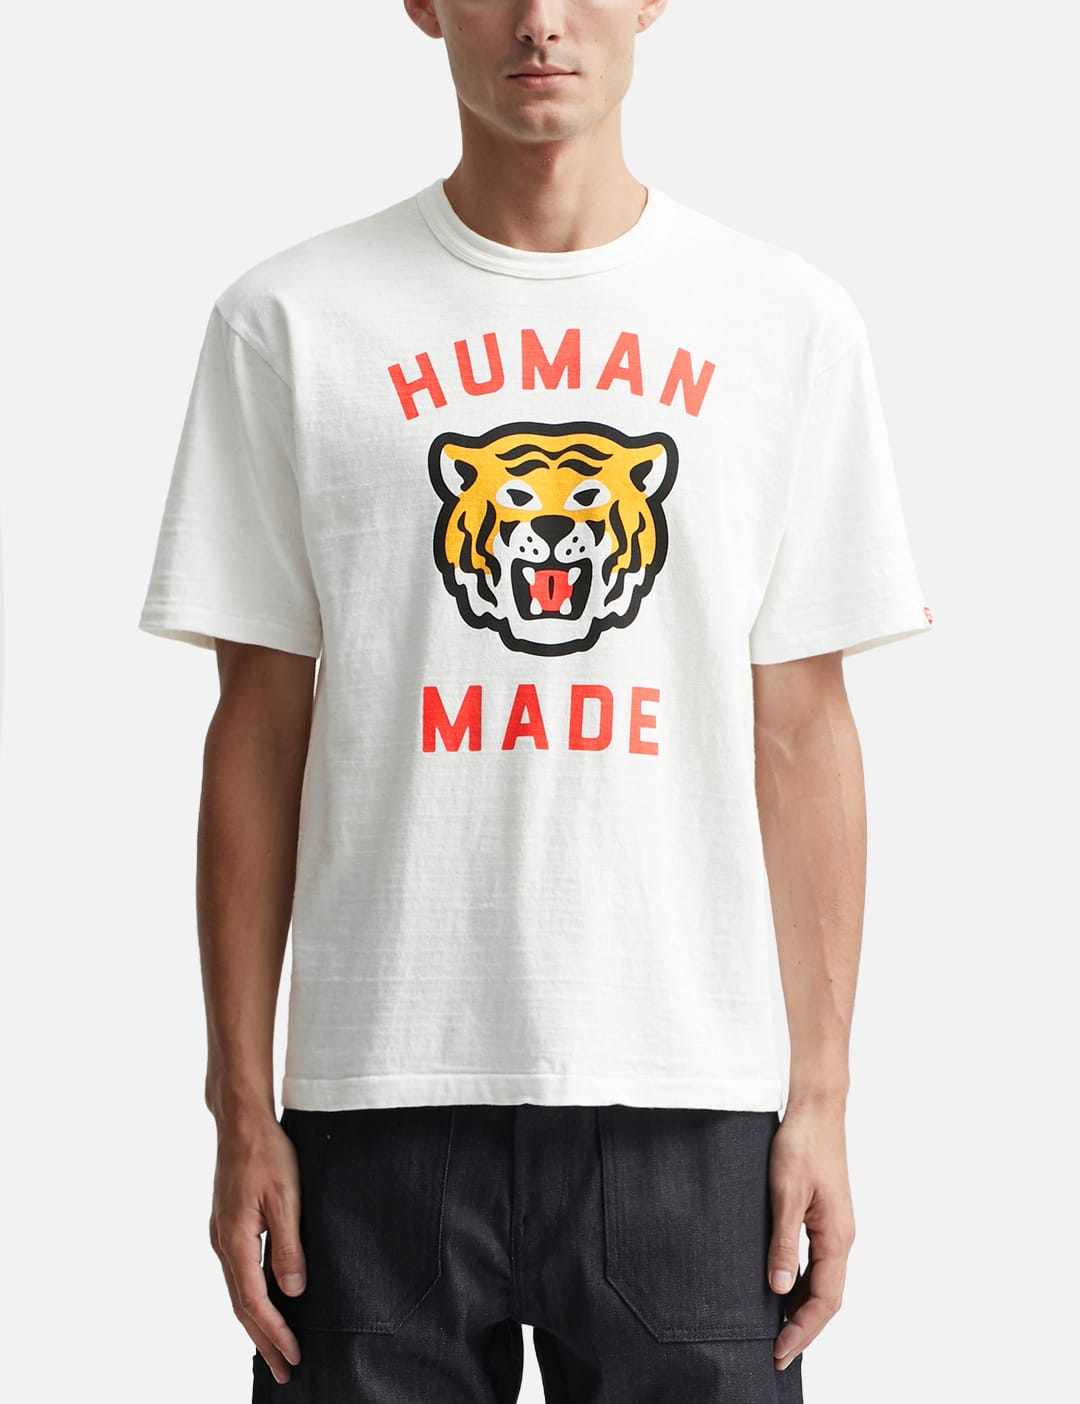 Human Made - GRAPHIC T-SHIRT #05 | HBX - Globally Curated Fashion